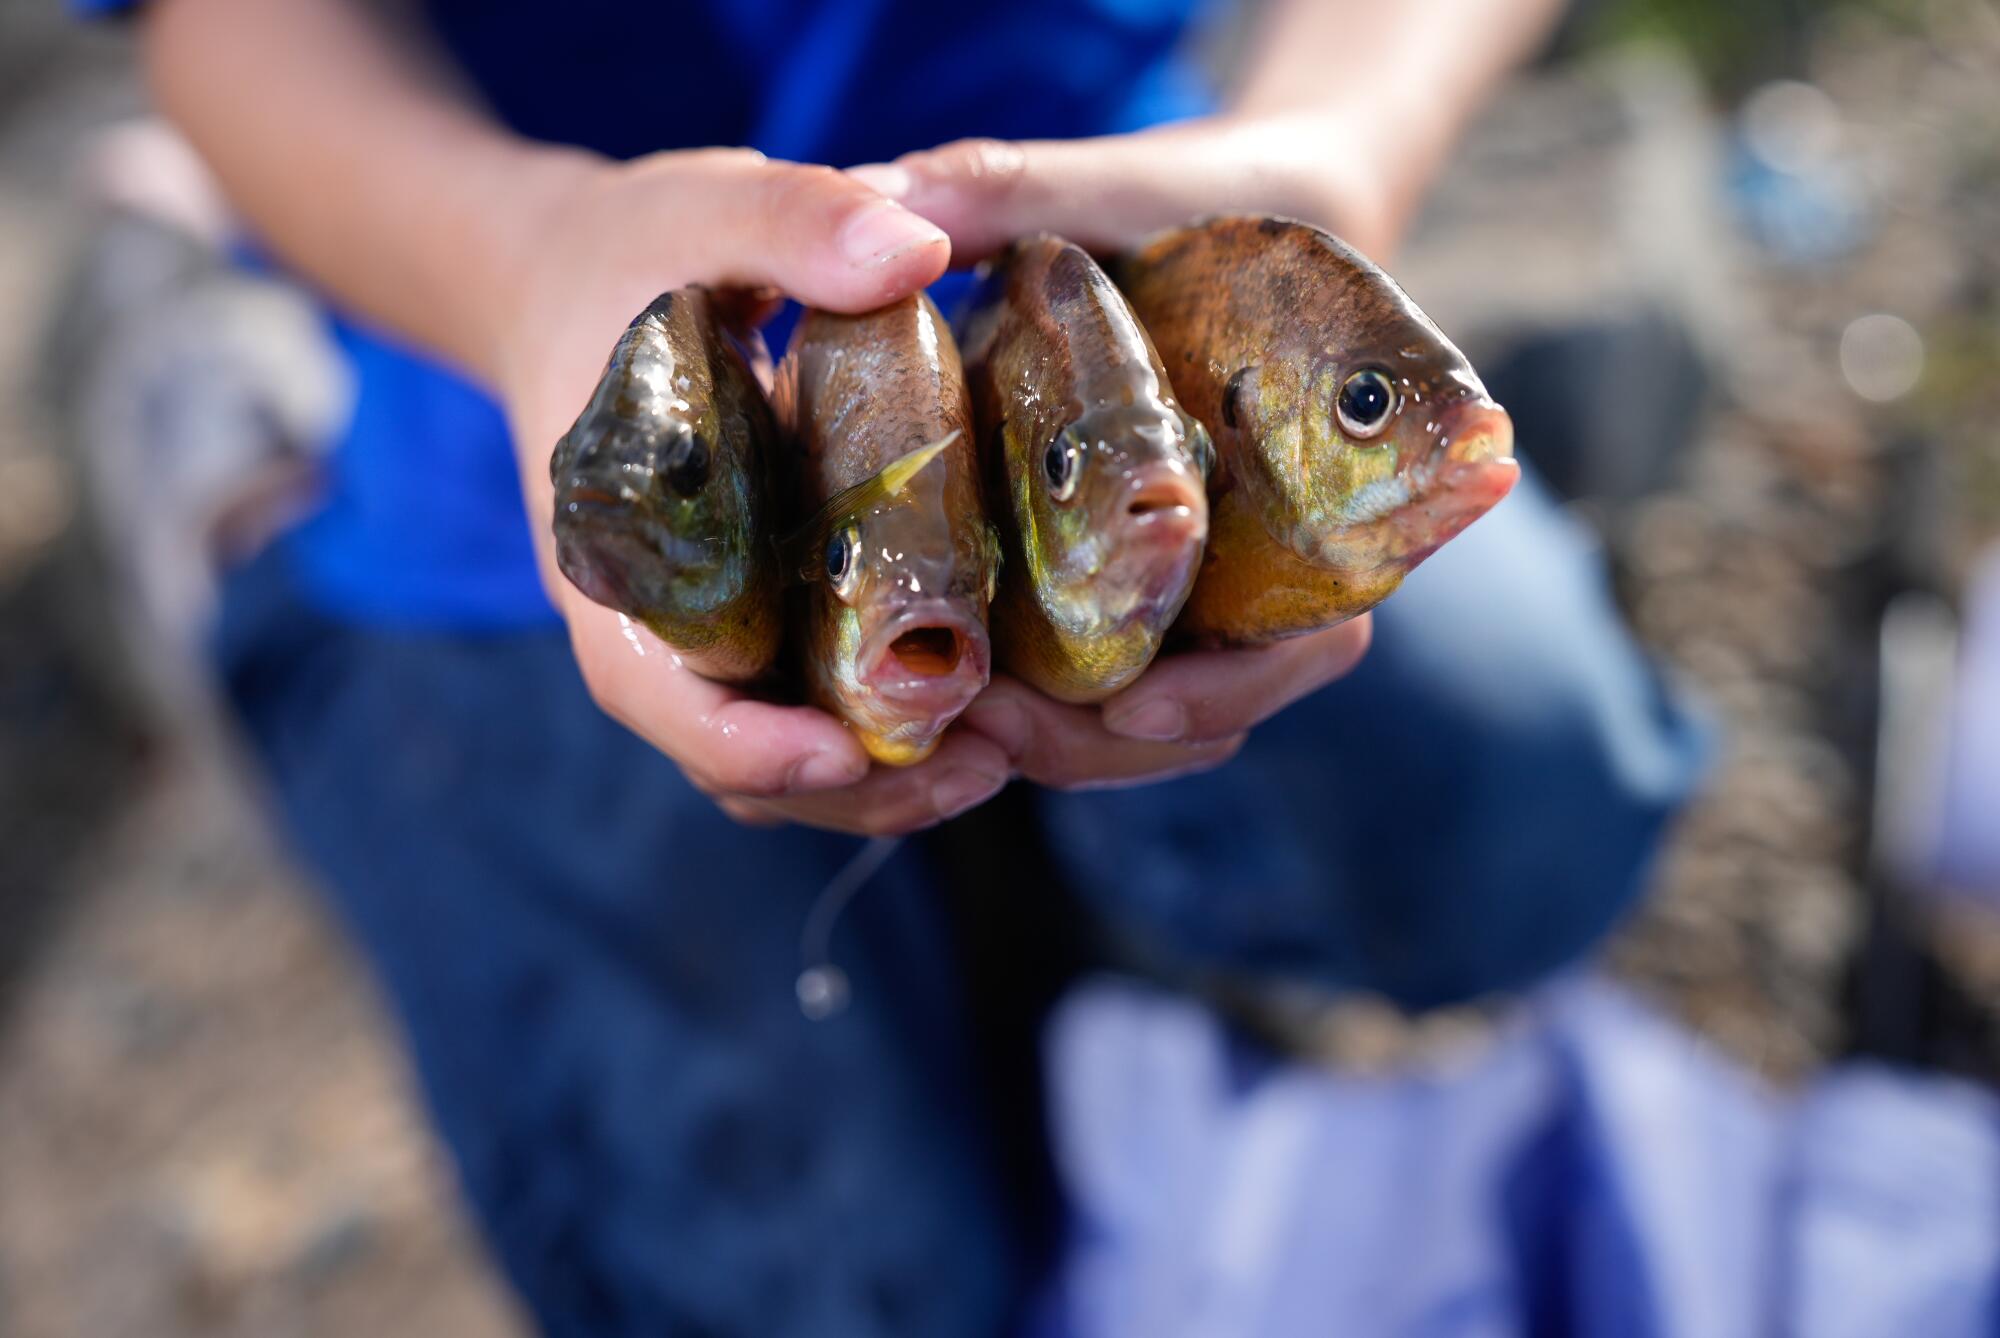 Christopher Marquez holds a set of bluegill fish his family caught in the Clifton Court Forebay in Byron.